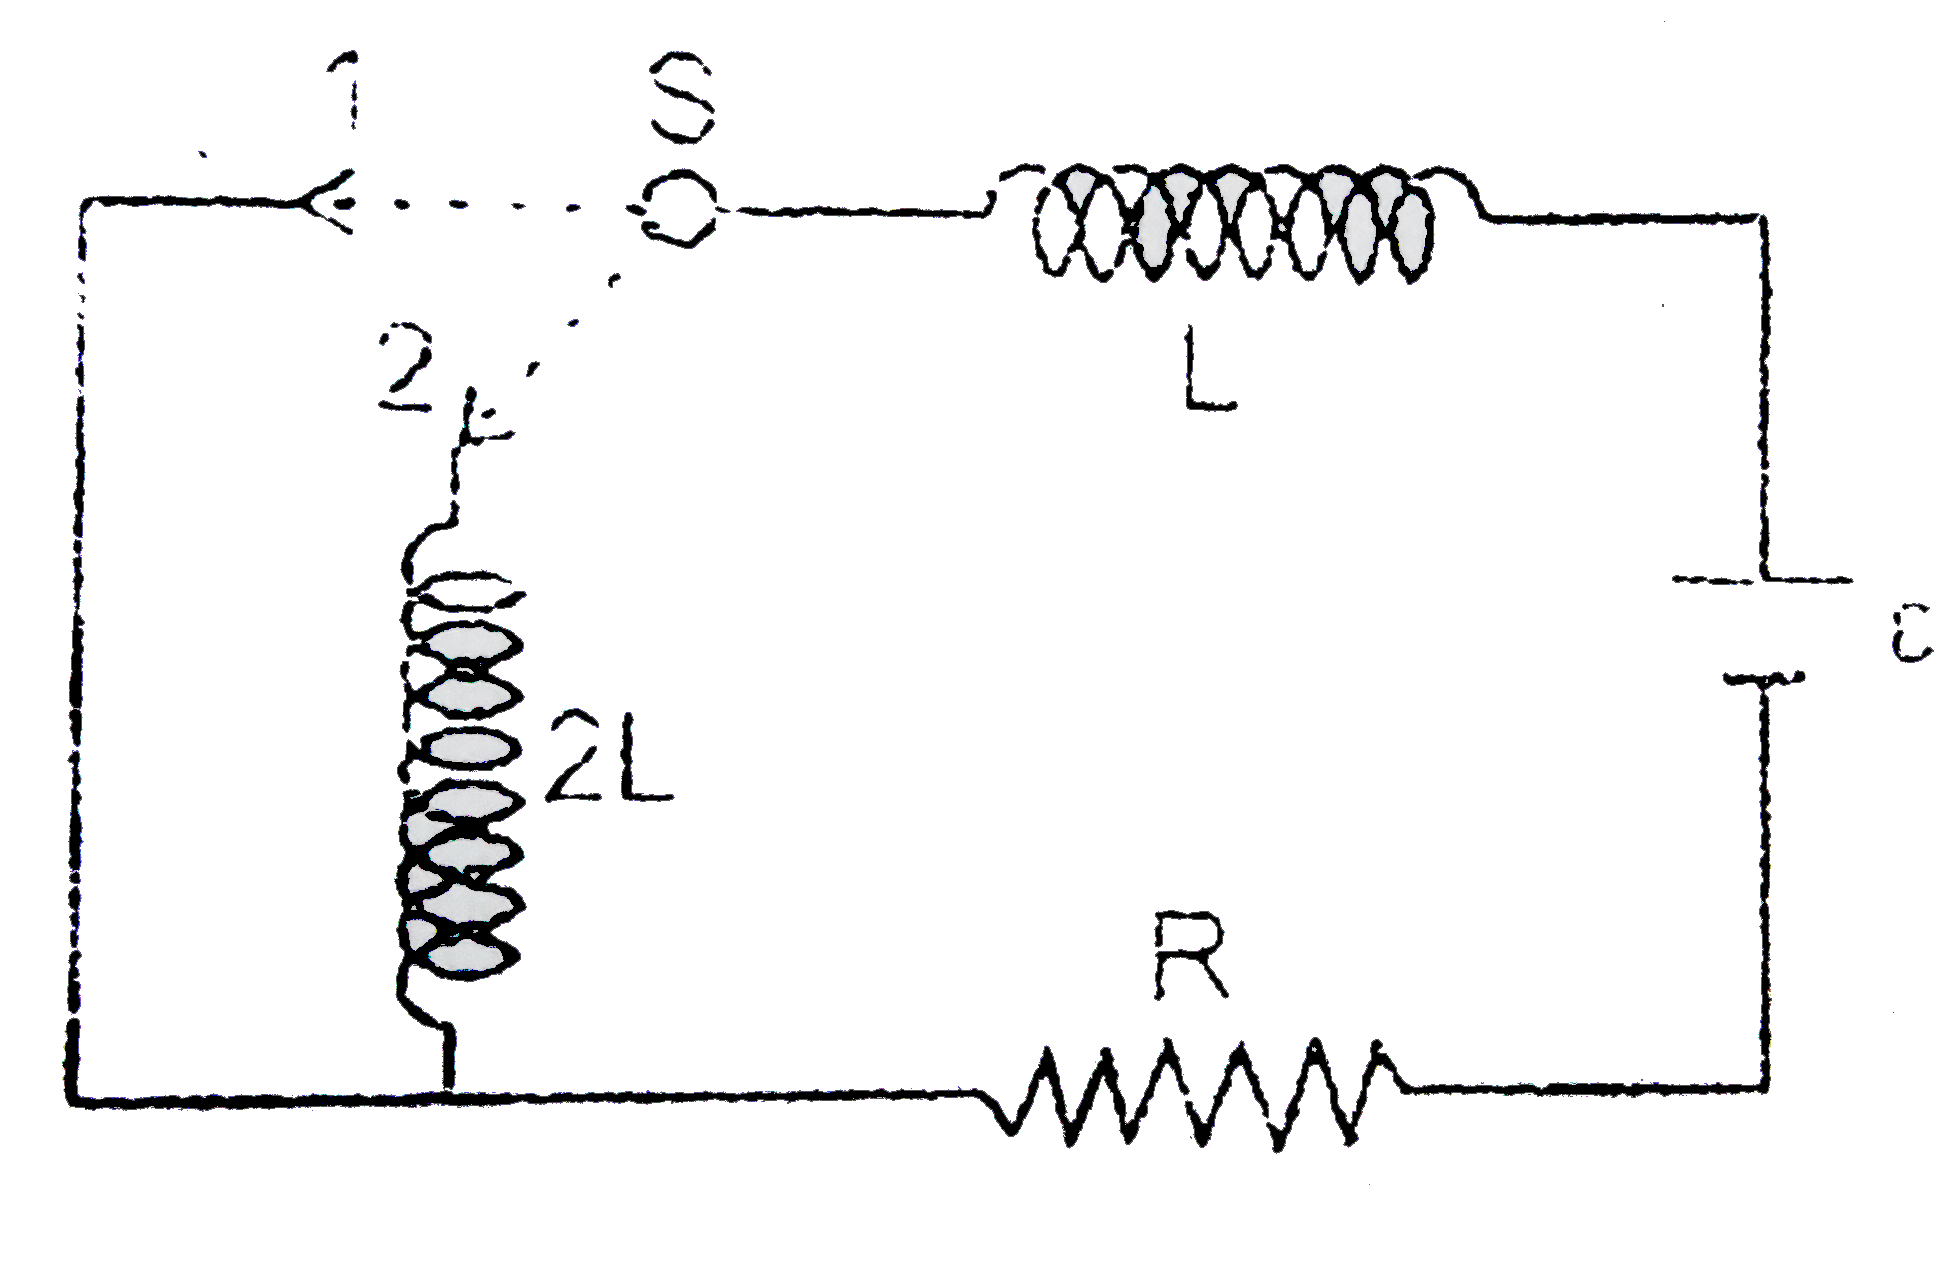 In the circuit shown, the switch S is shifted to position 2 from position 1 at t=0, having been in position 1 for a long time.Find the current in the circuit as a function of time.